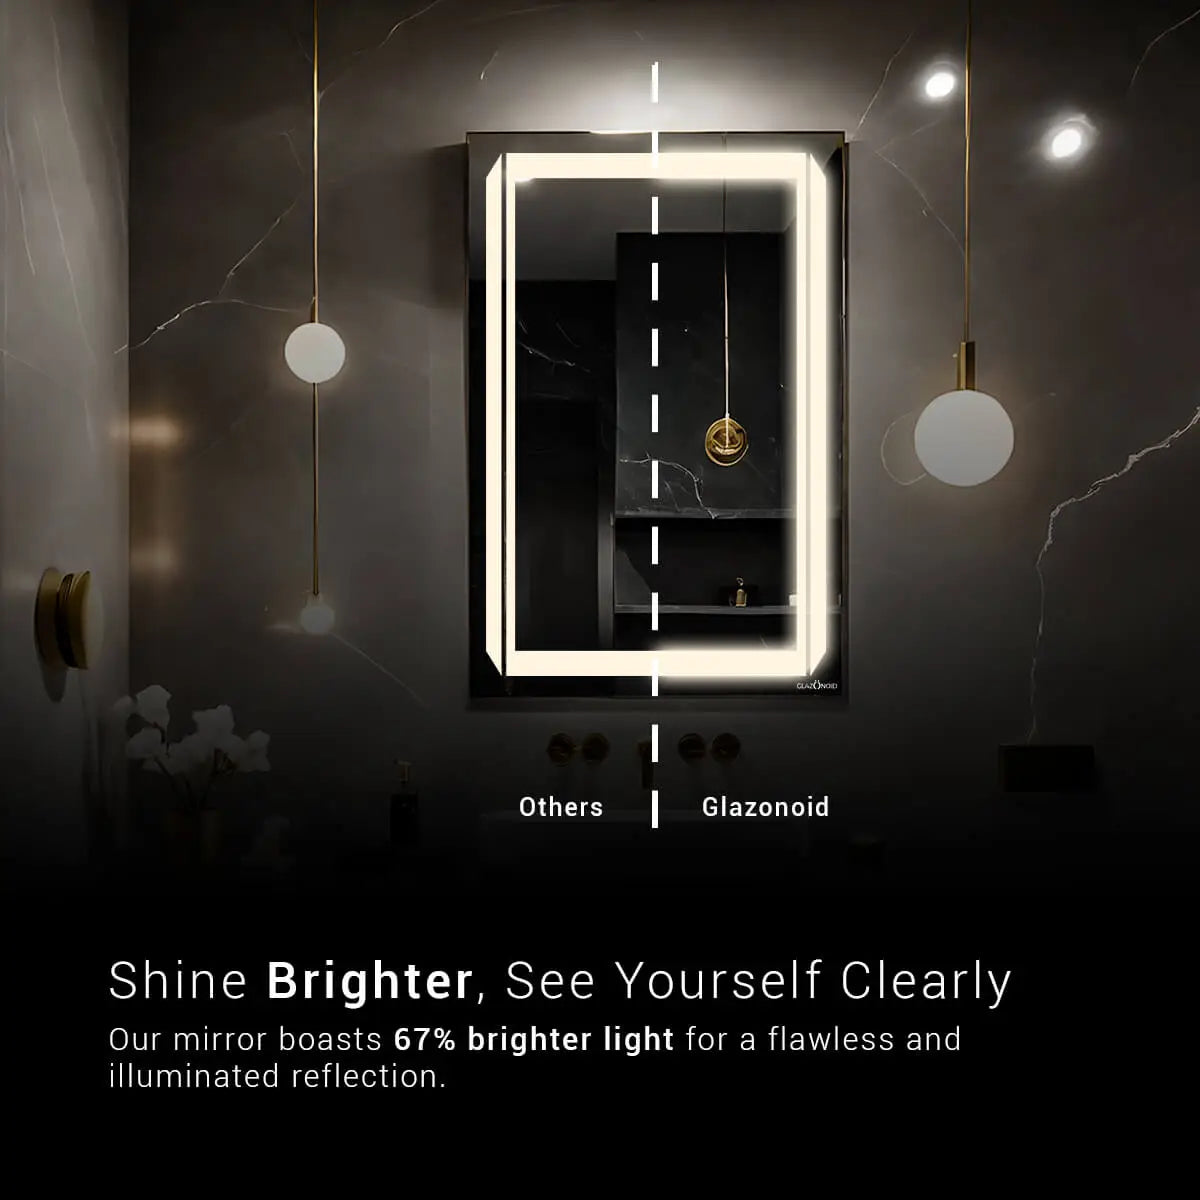 Modern rectangular mirror with built-in LED lighting that provides 67% brighter illumination for a flawless reflection. Text overlay says 'Shine brighter, see yourself clearly. Our mirror boasts 67% brighter light for a flawless and illuminated reflection. This mirror is ideal for applying makeup or shaving. This versatile mirror is perfect for a variety of tasks.